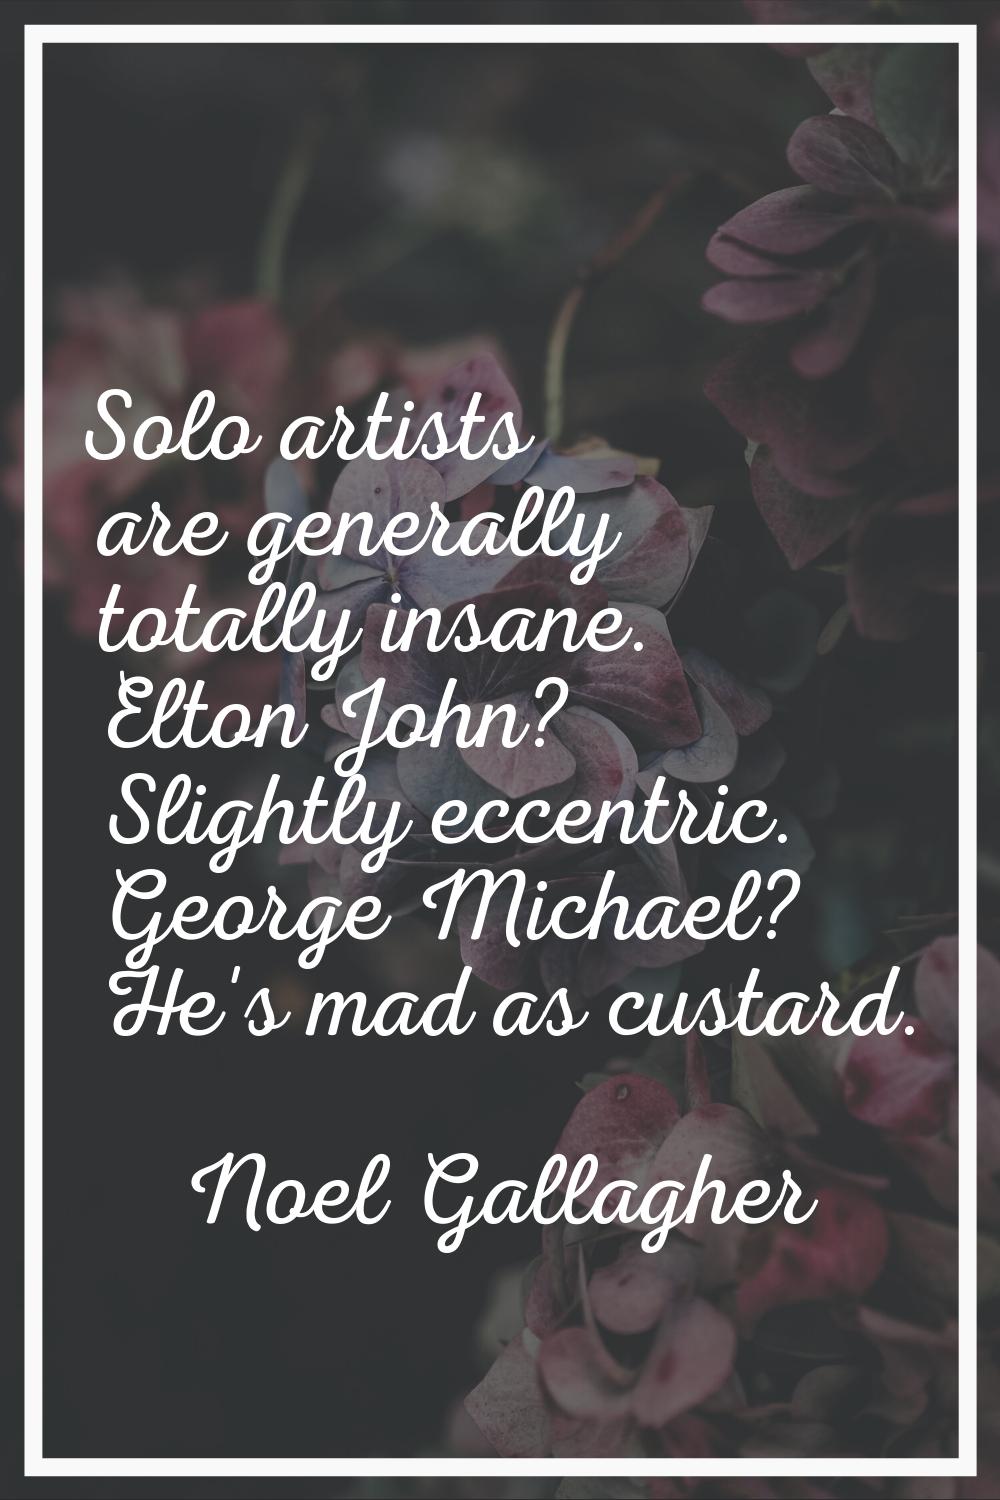 Solo artists are generally totally insane. Elton John? Slightly eccentric. George Michael? He's mad